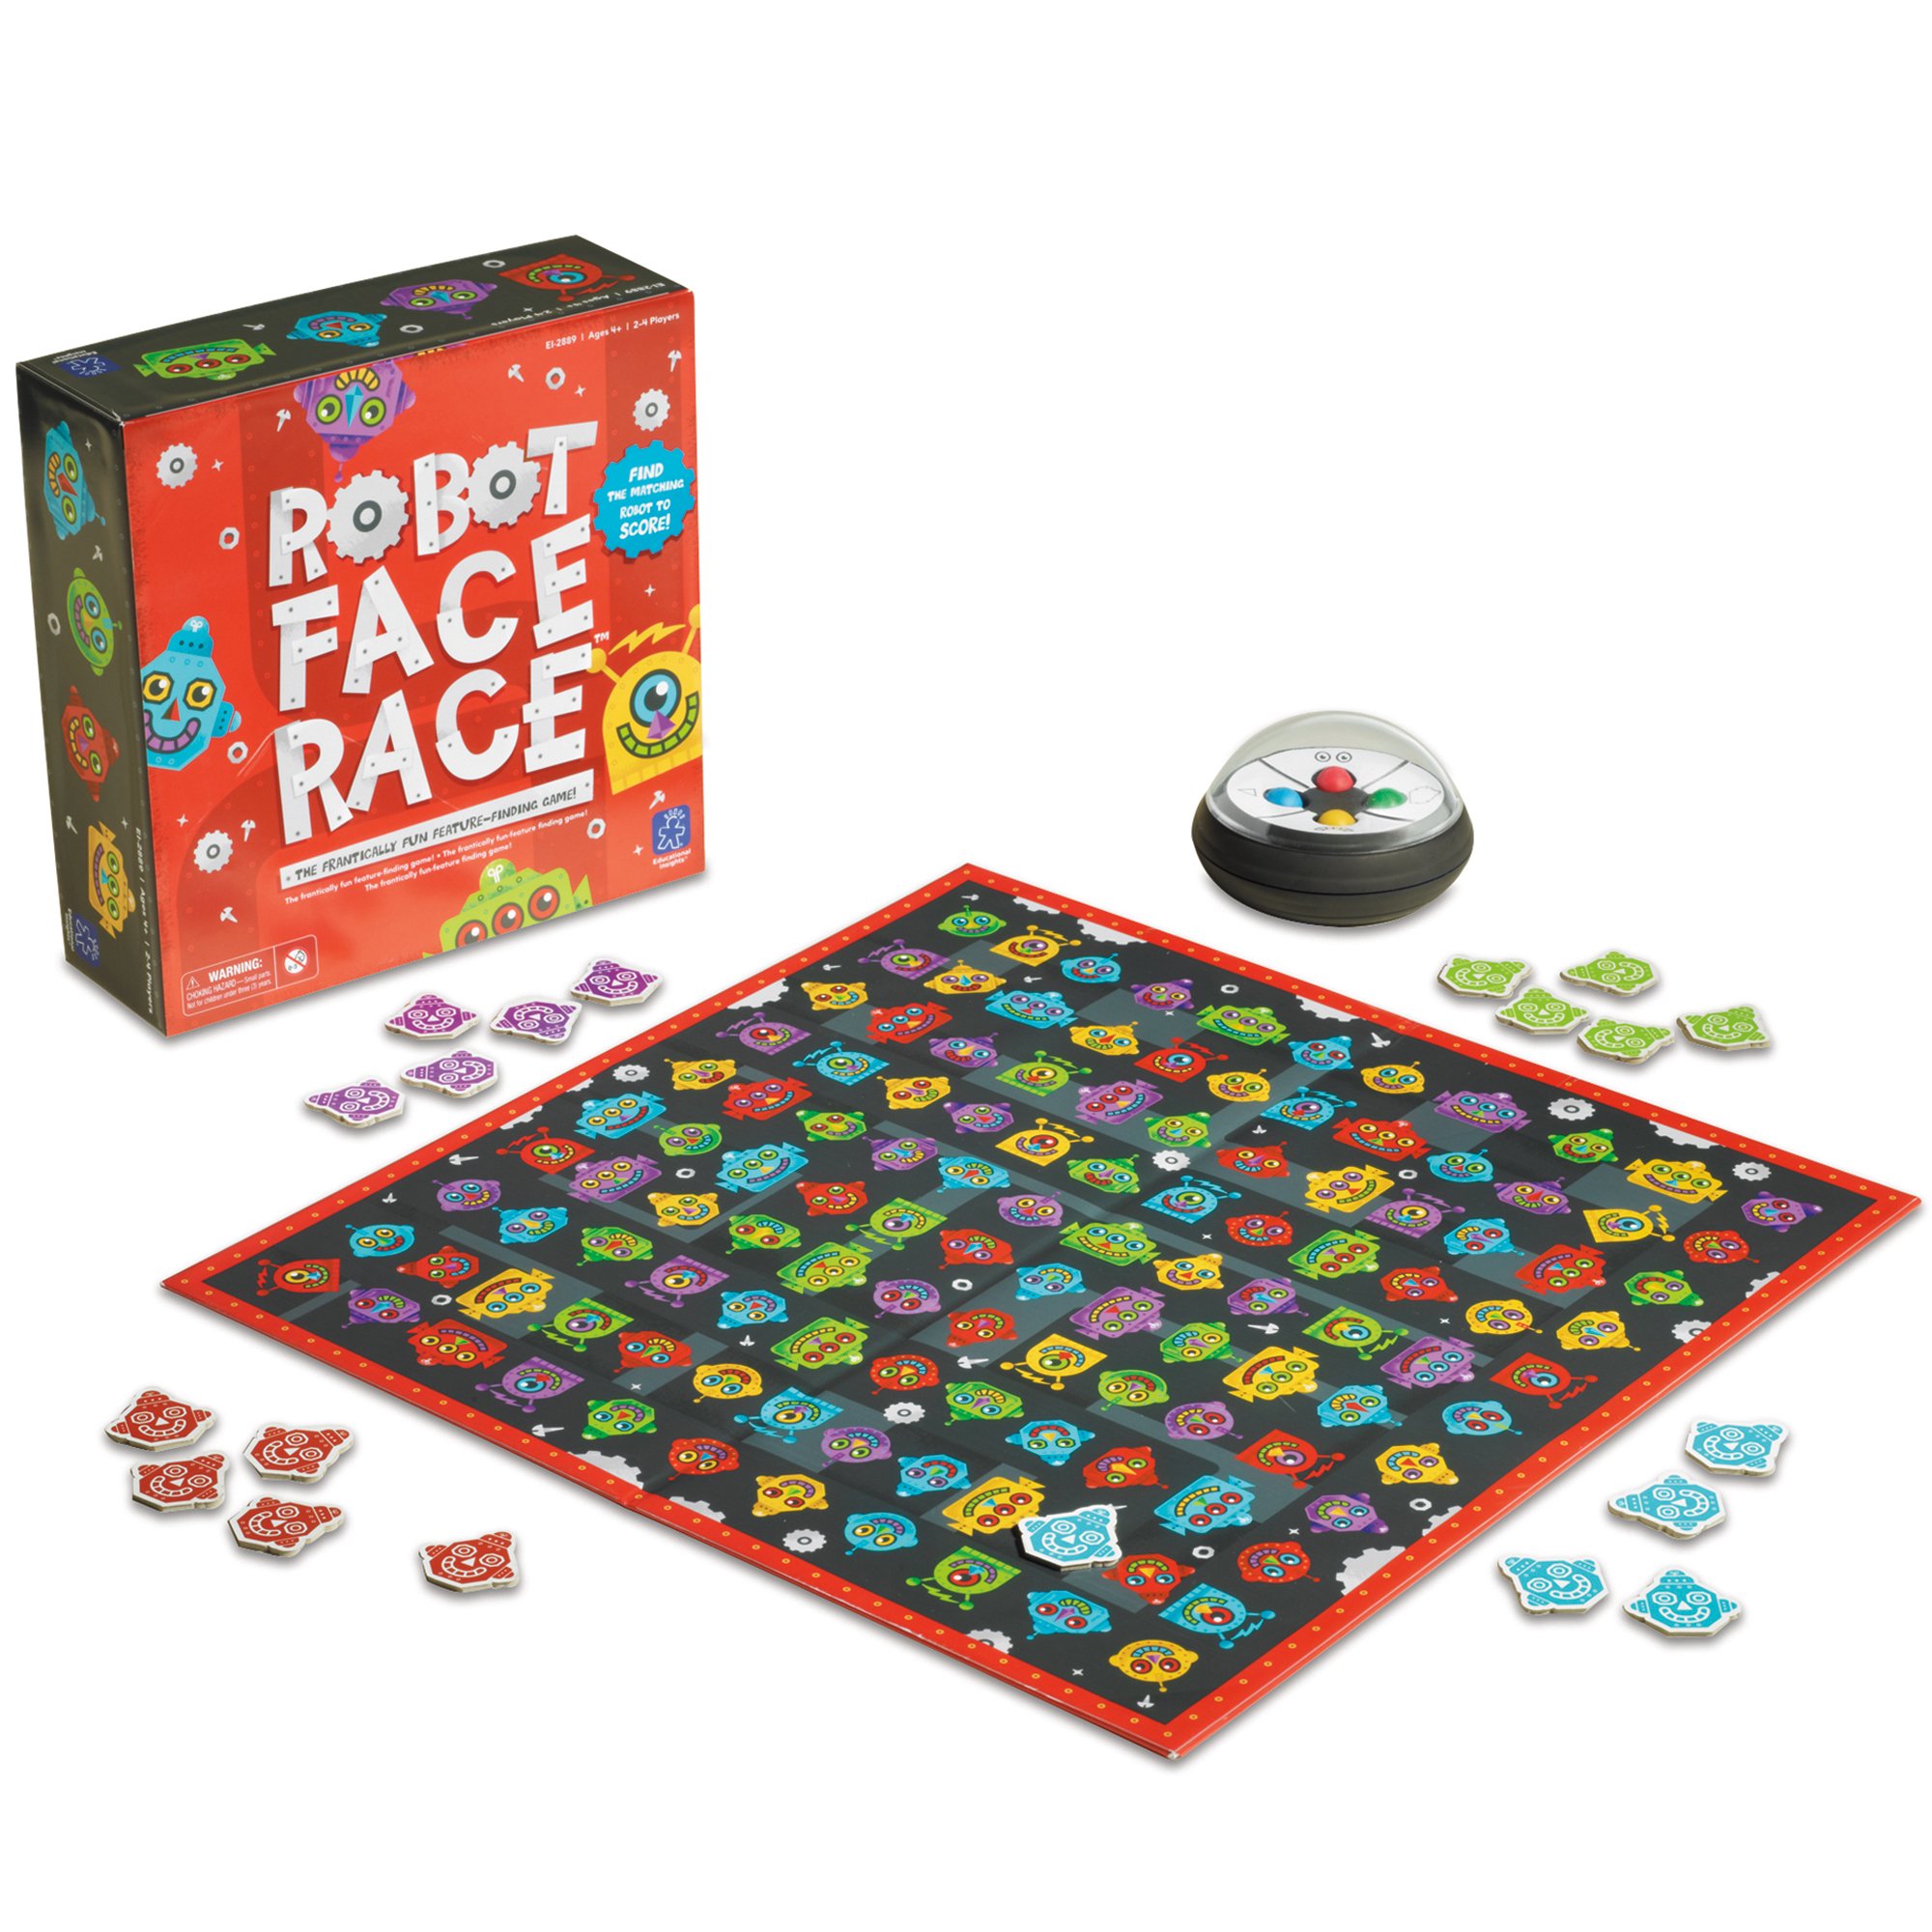 Educational Insights Robot Face Race, Fast Paced Color Recognition Matching Game, for 2-4 Players, Award-Winning Fun Family Board Game for Kids Ages 4+